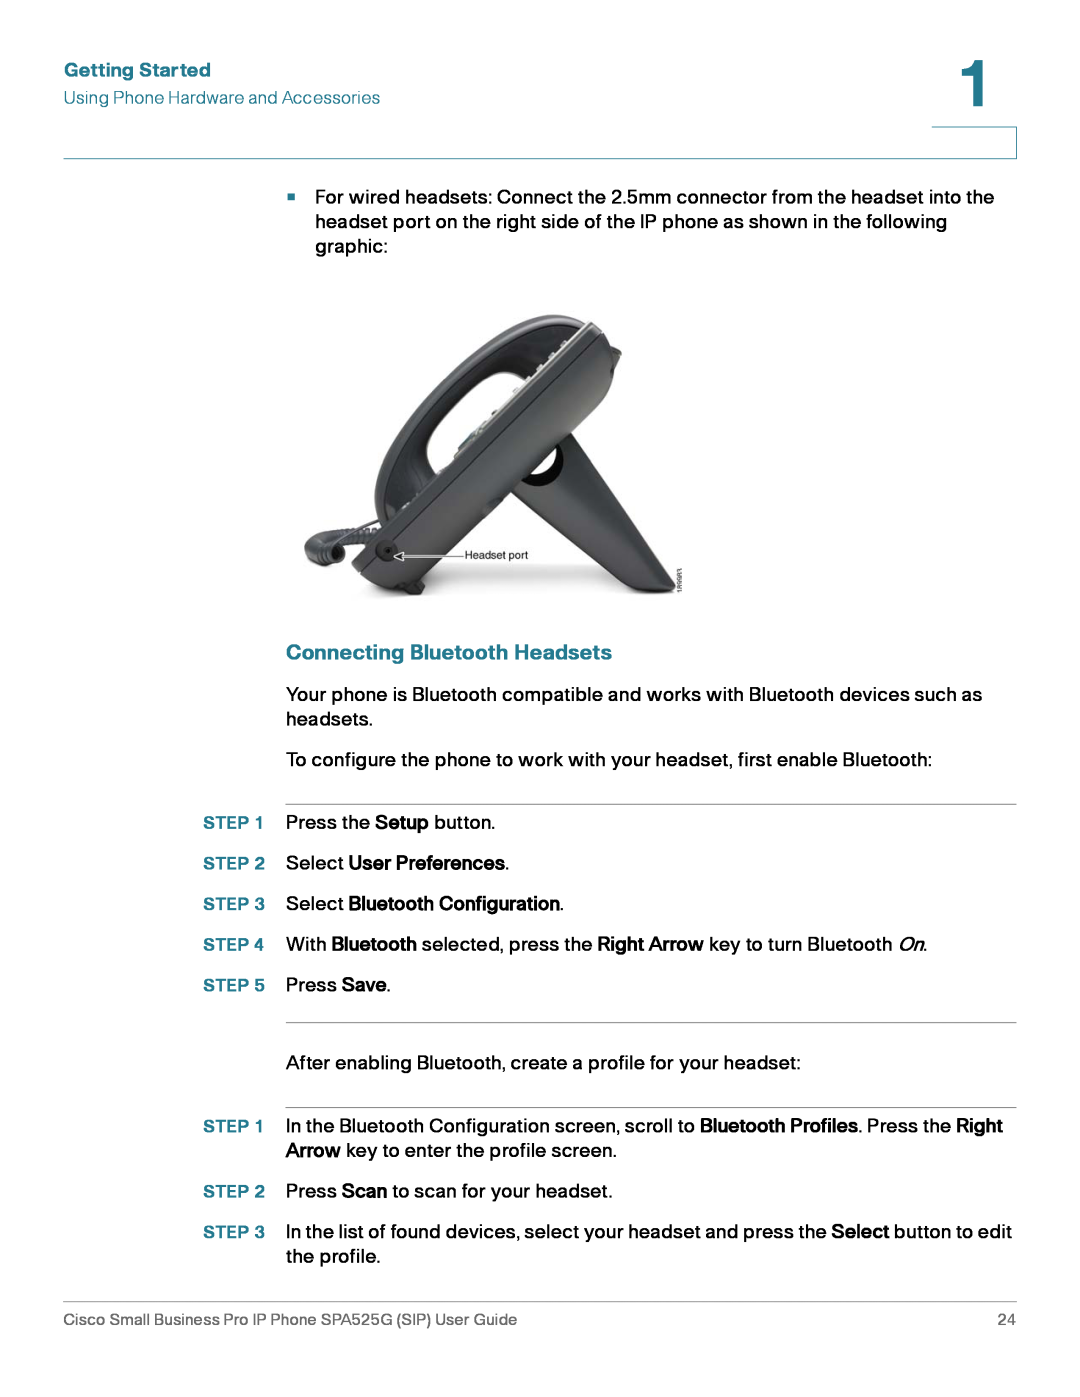 Cisco Systems SPA525G manual Connecting Bluetooth Headsets, Getting Started 